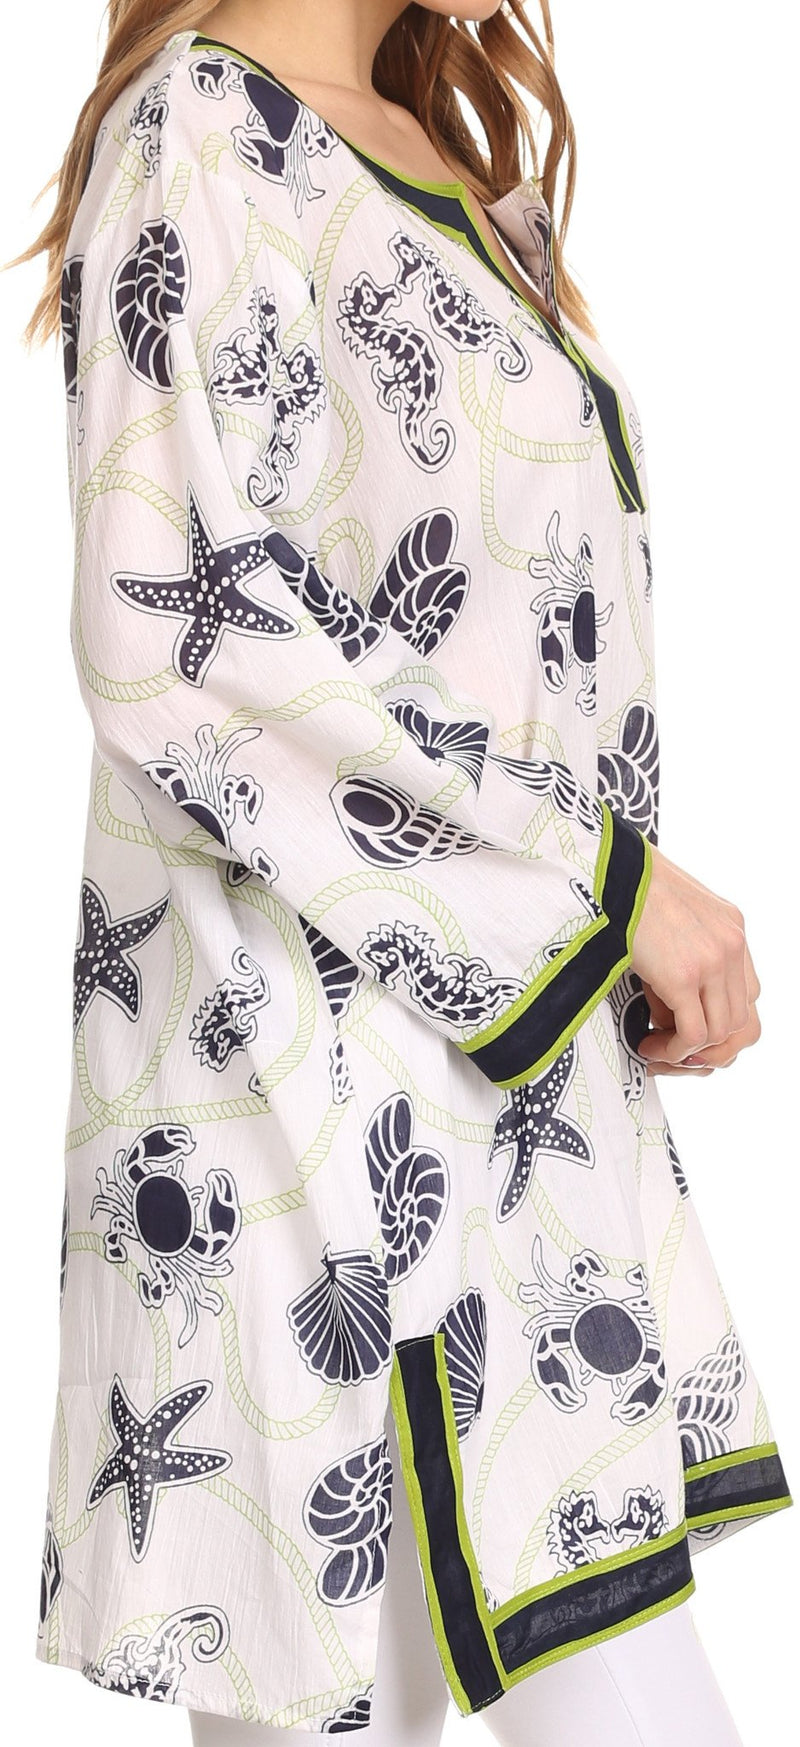 Sakkas Fawn Tunic Blouse Top With Printed Pattern And Multi Toned Trims